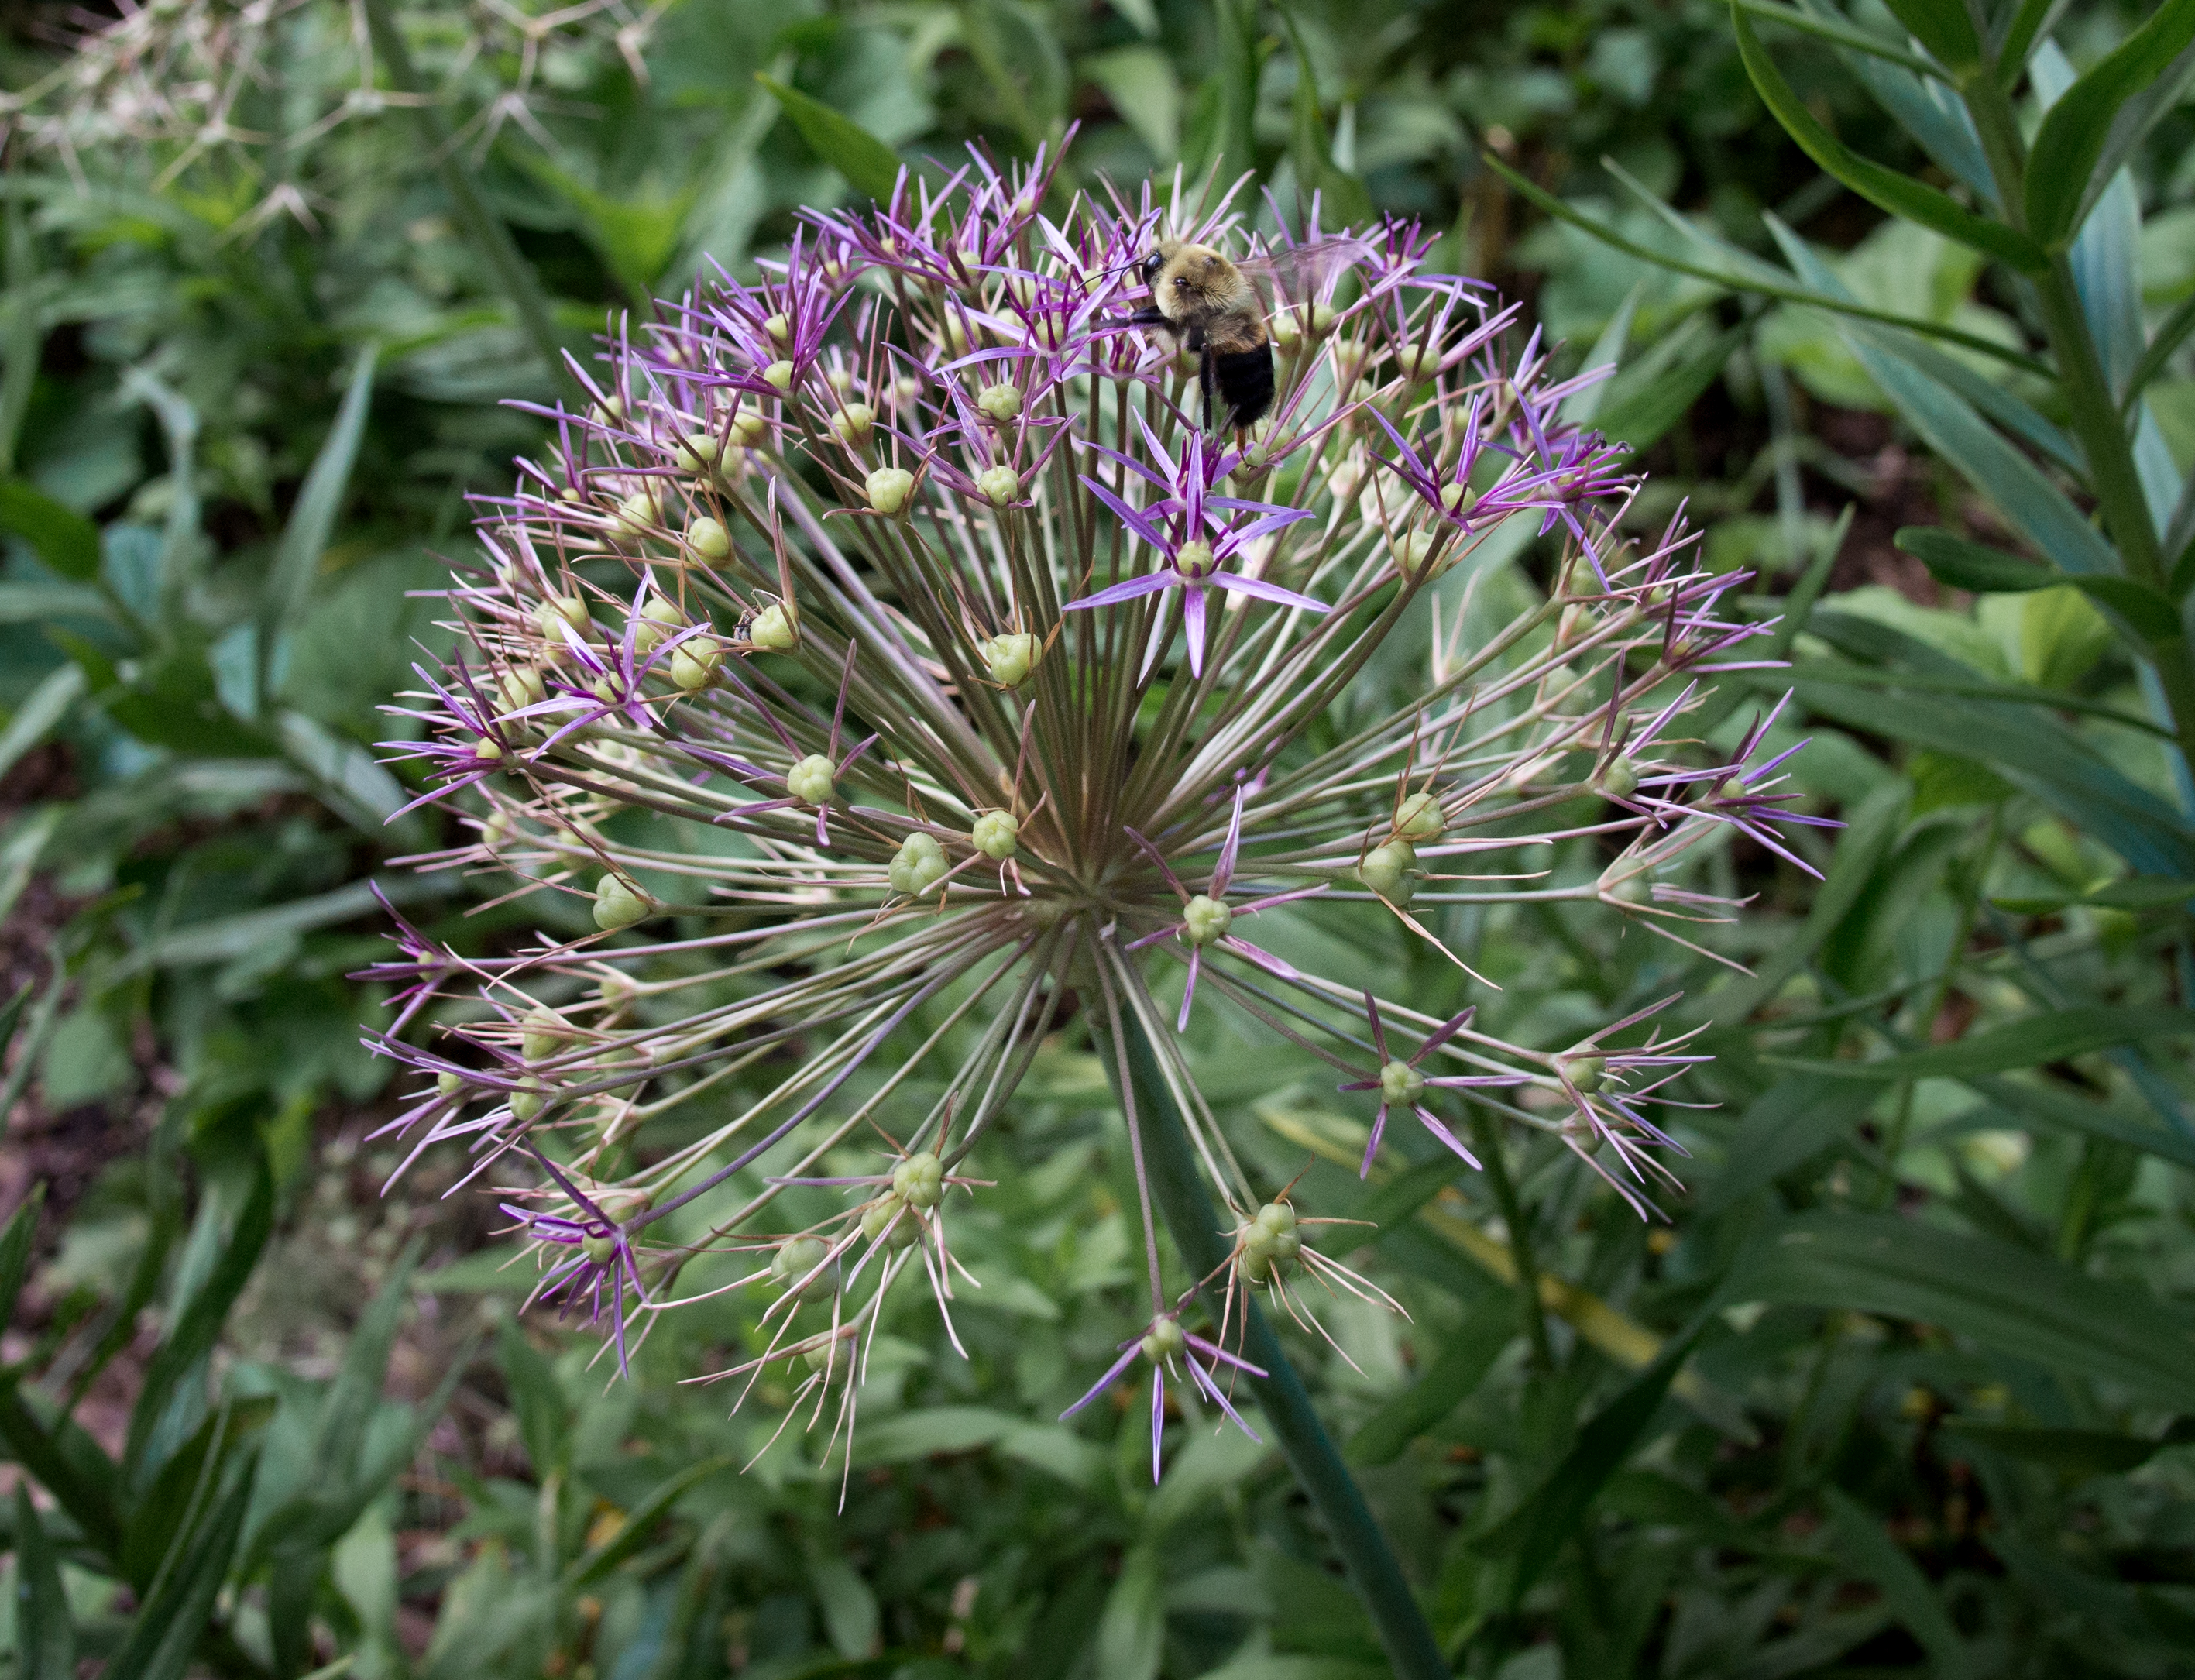 Brown-belted bumble bee on Allium in Central Park (81630)